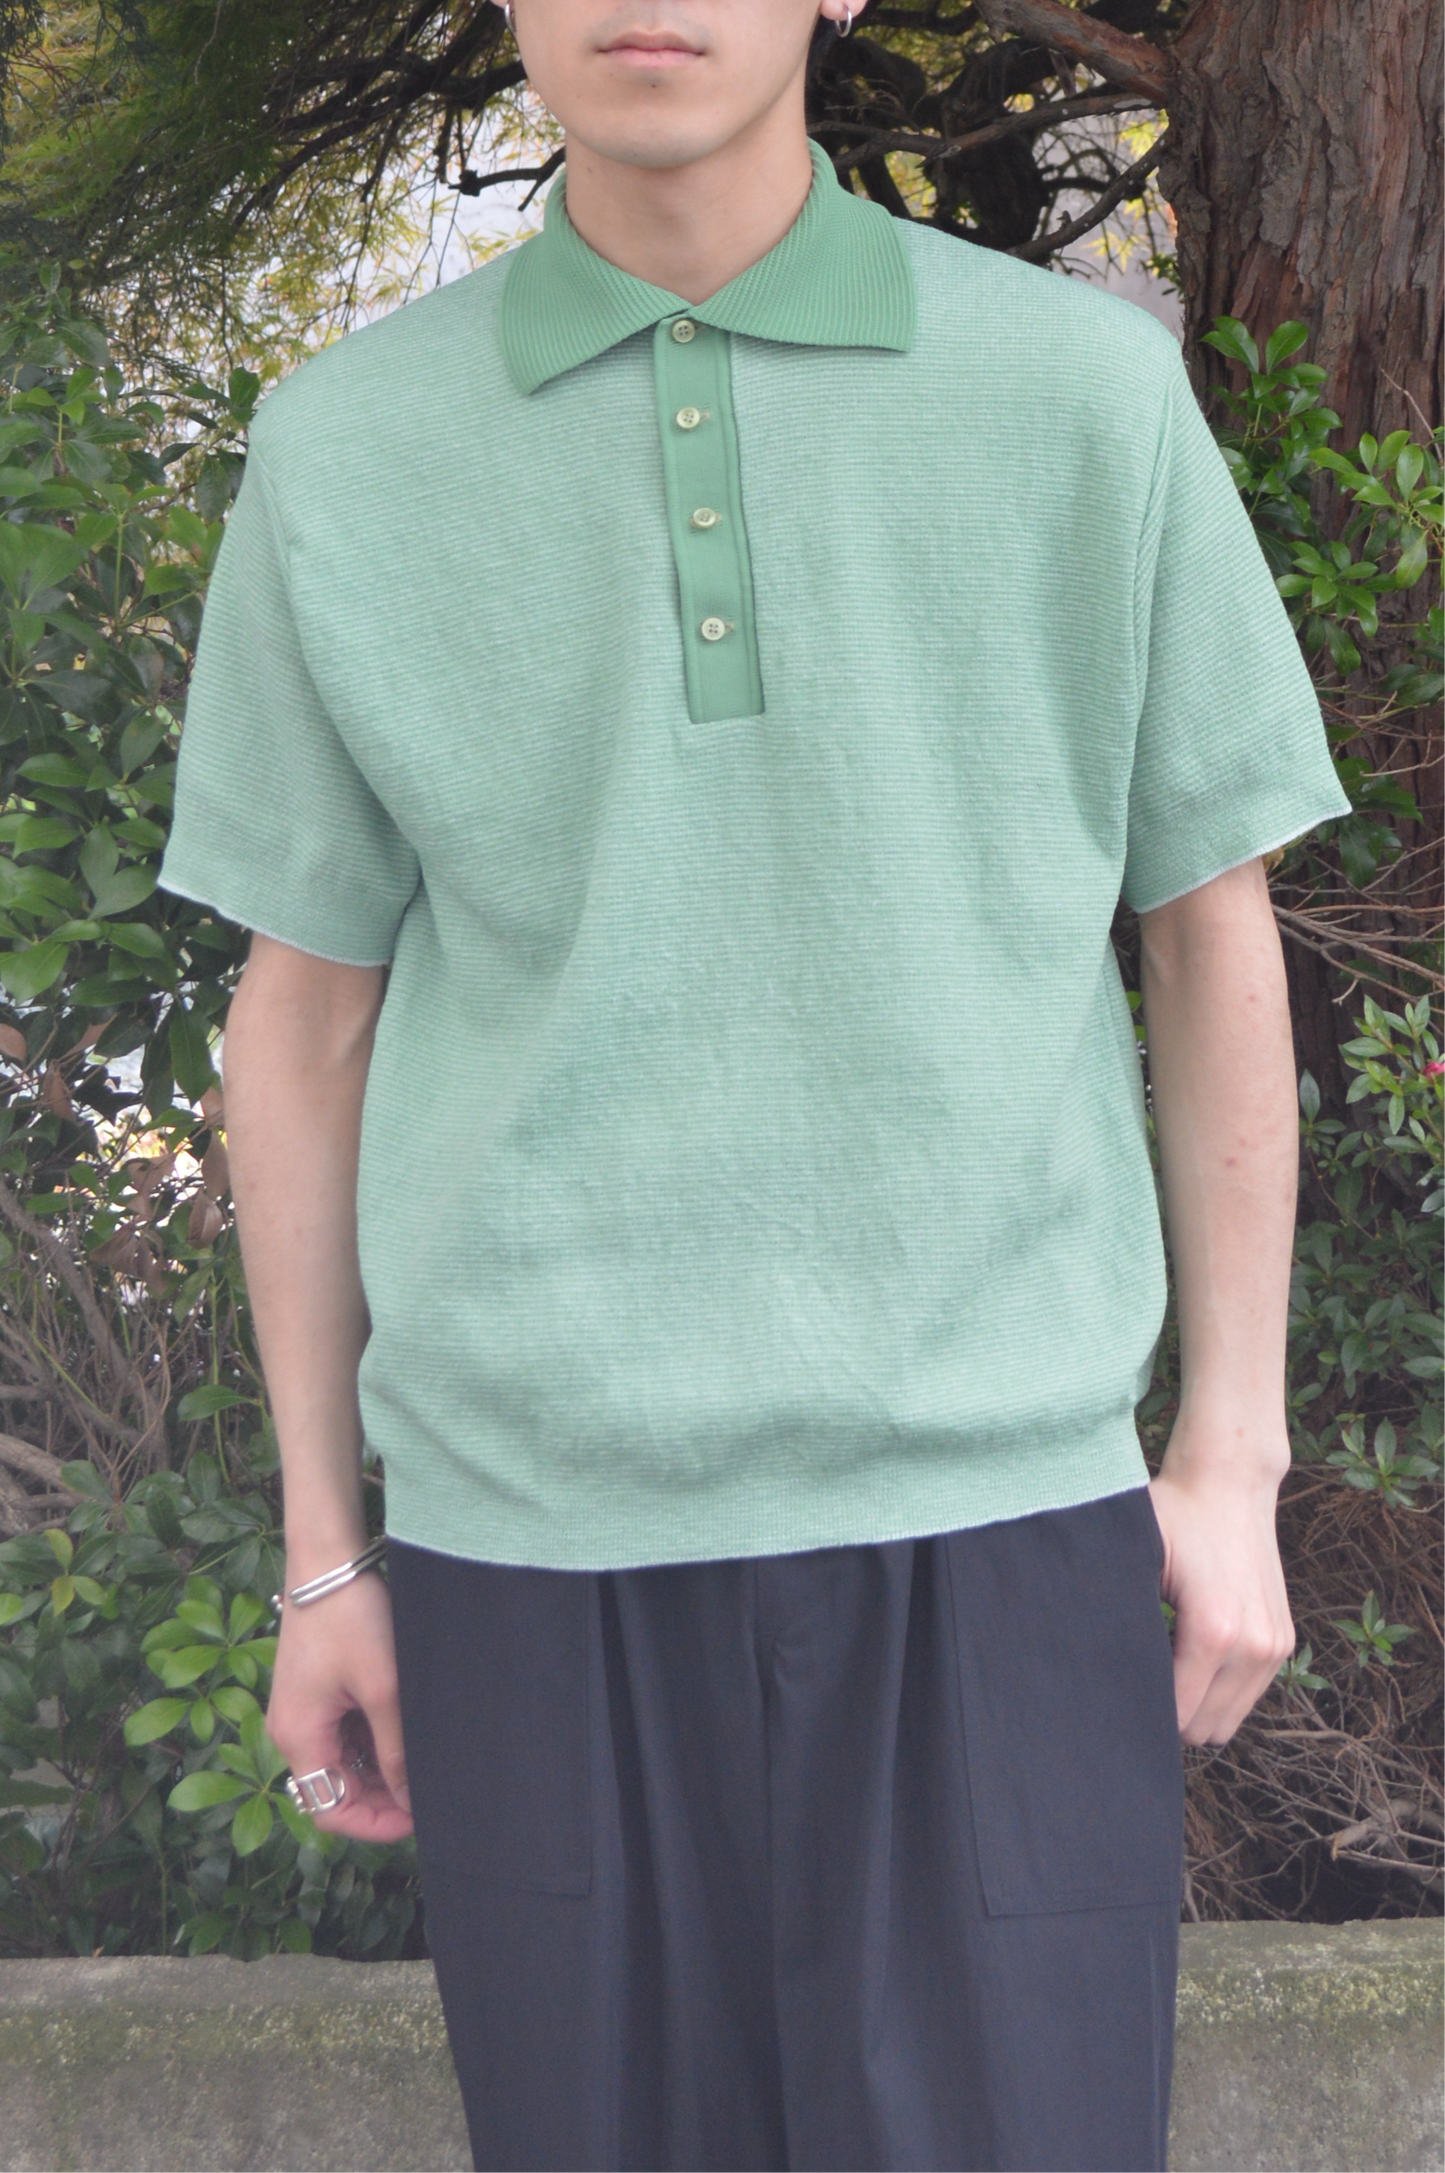 80s JCPenney polo shirt